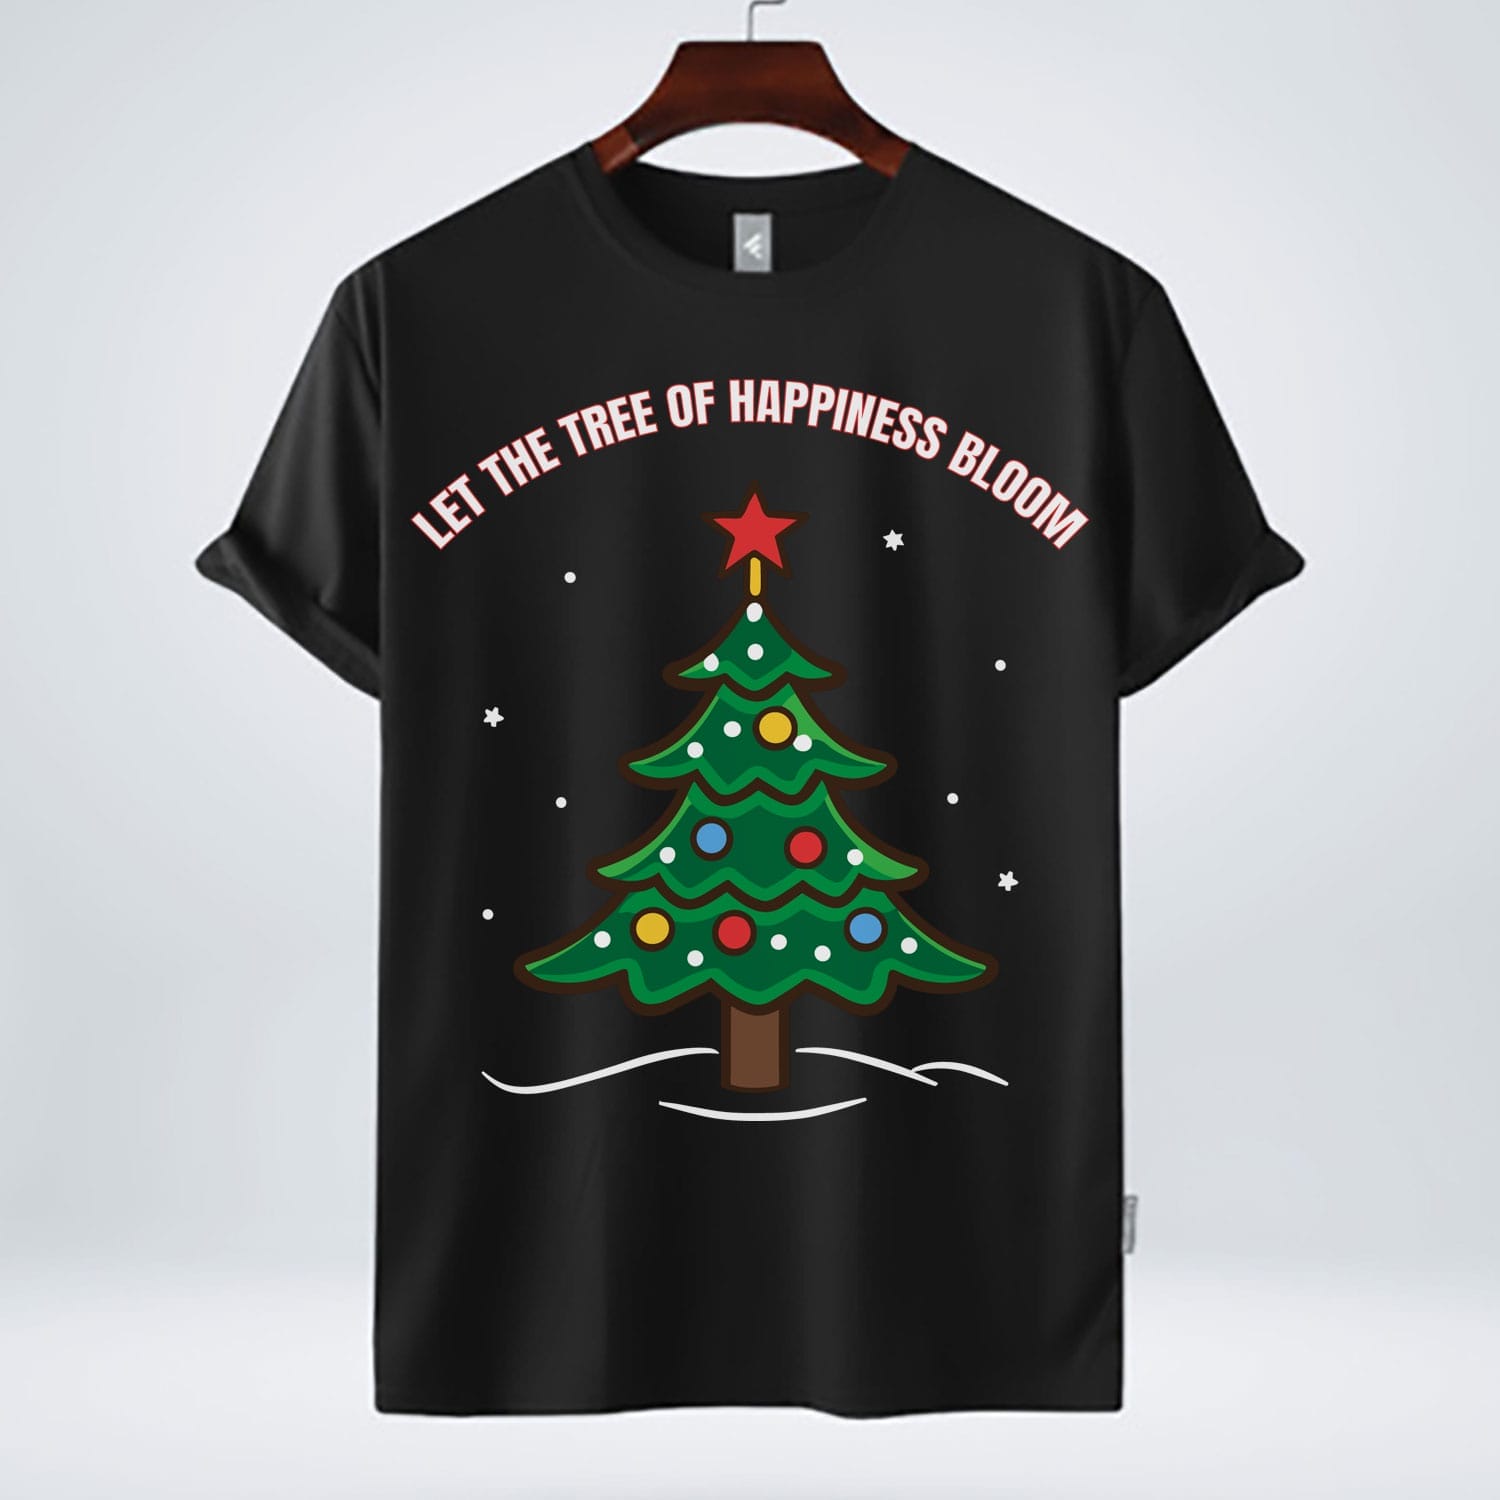 Let The Tree Of Happiness Bloom - Free Christmas T-Shirt Design